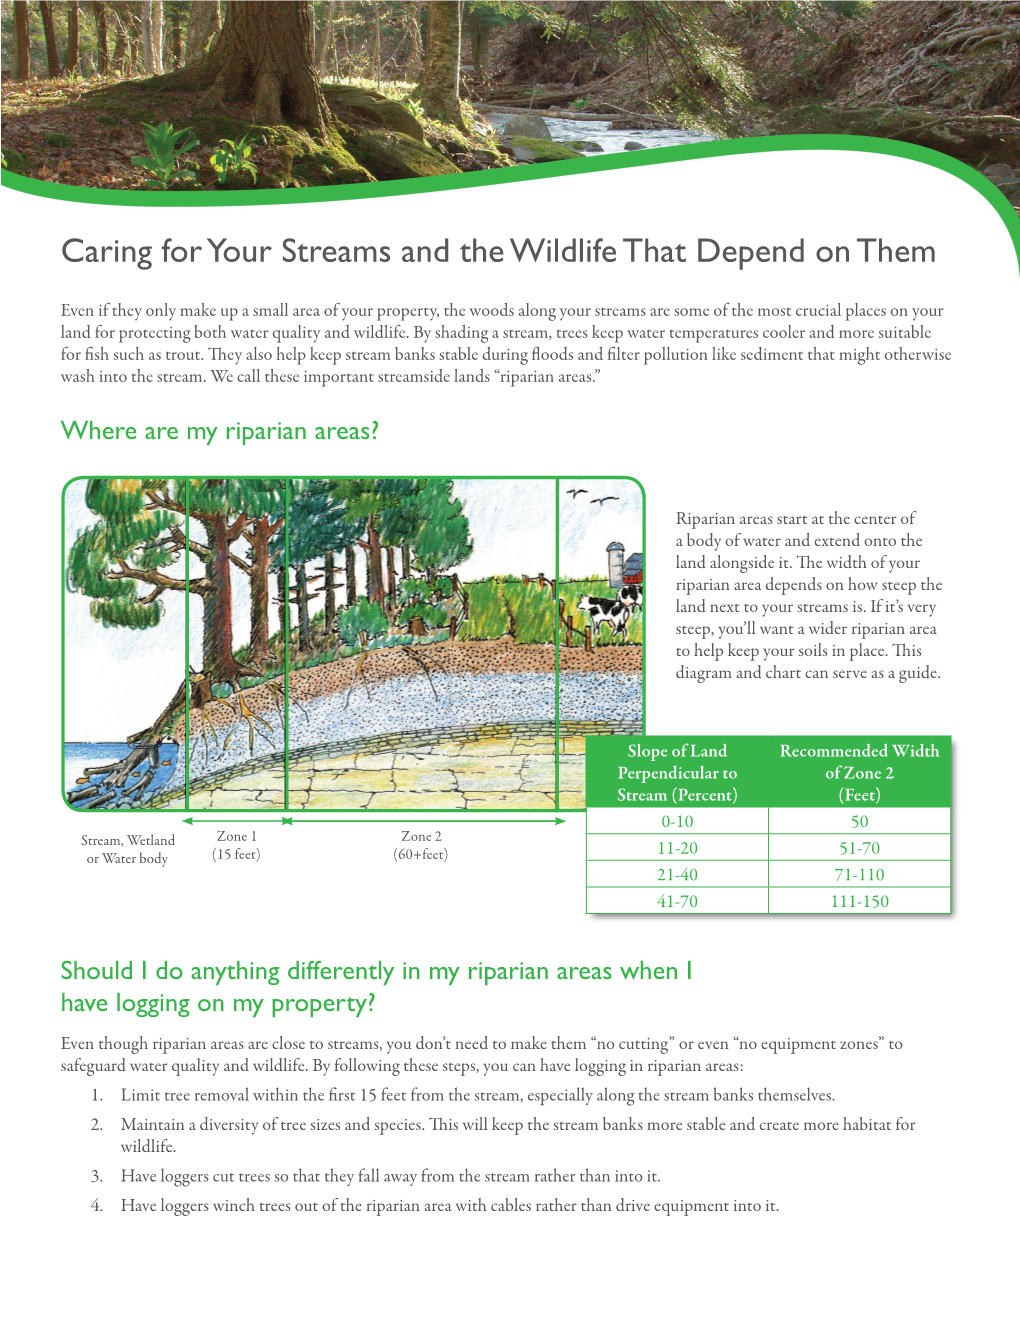 Caring for Your Streams and the Wildlife That Depend on Them